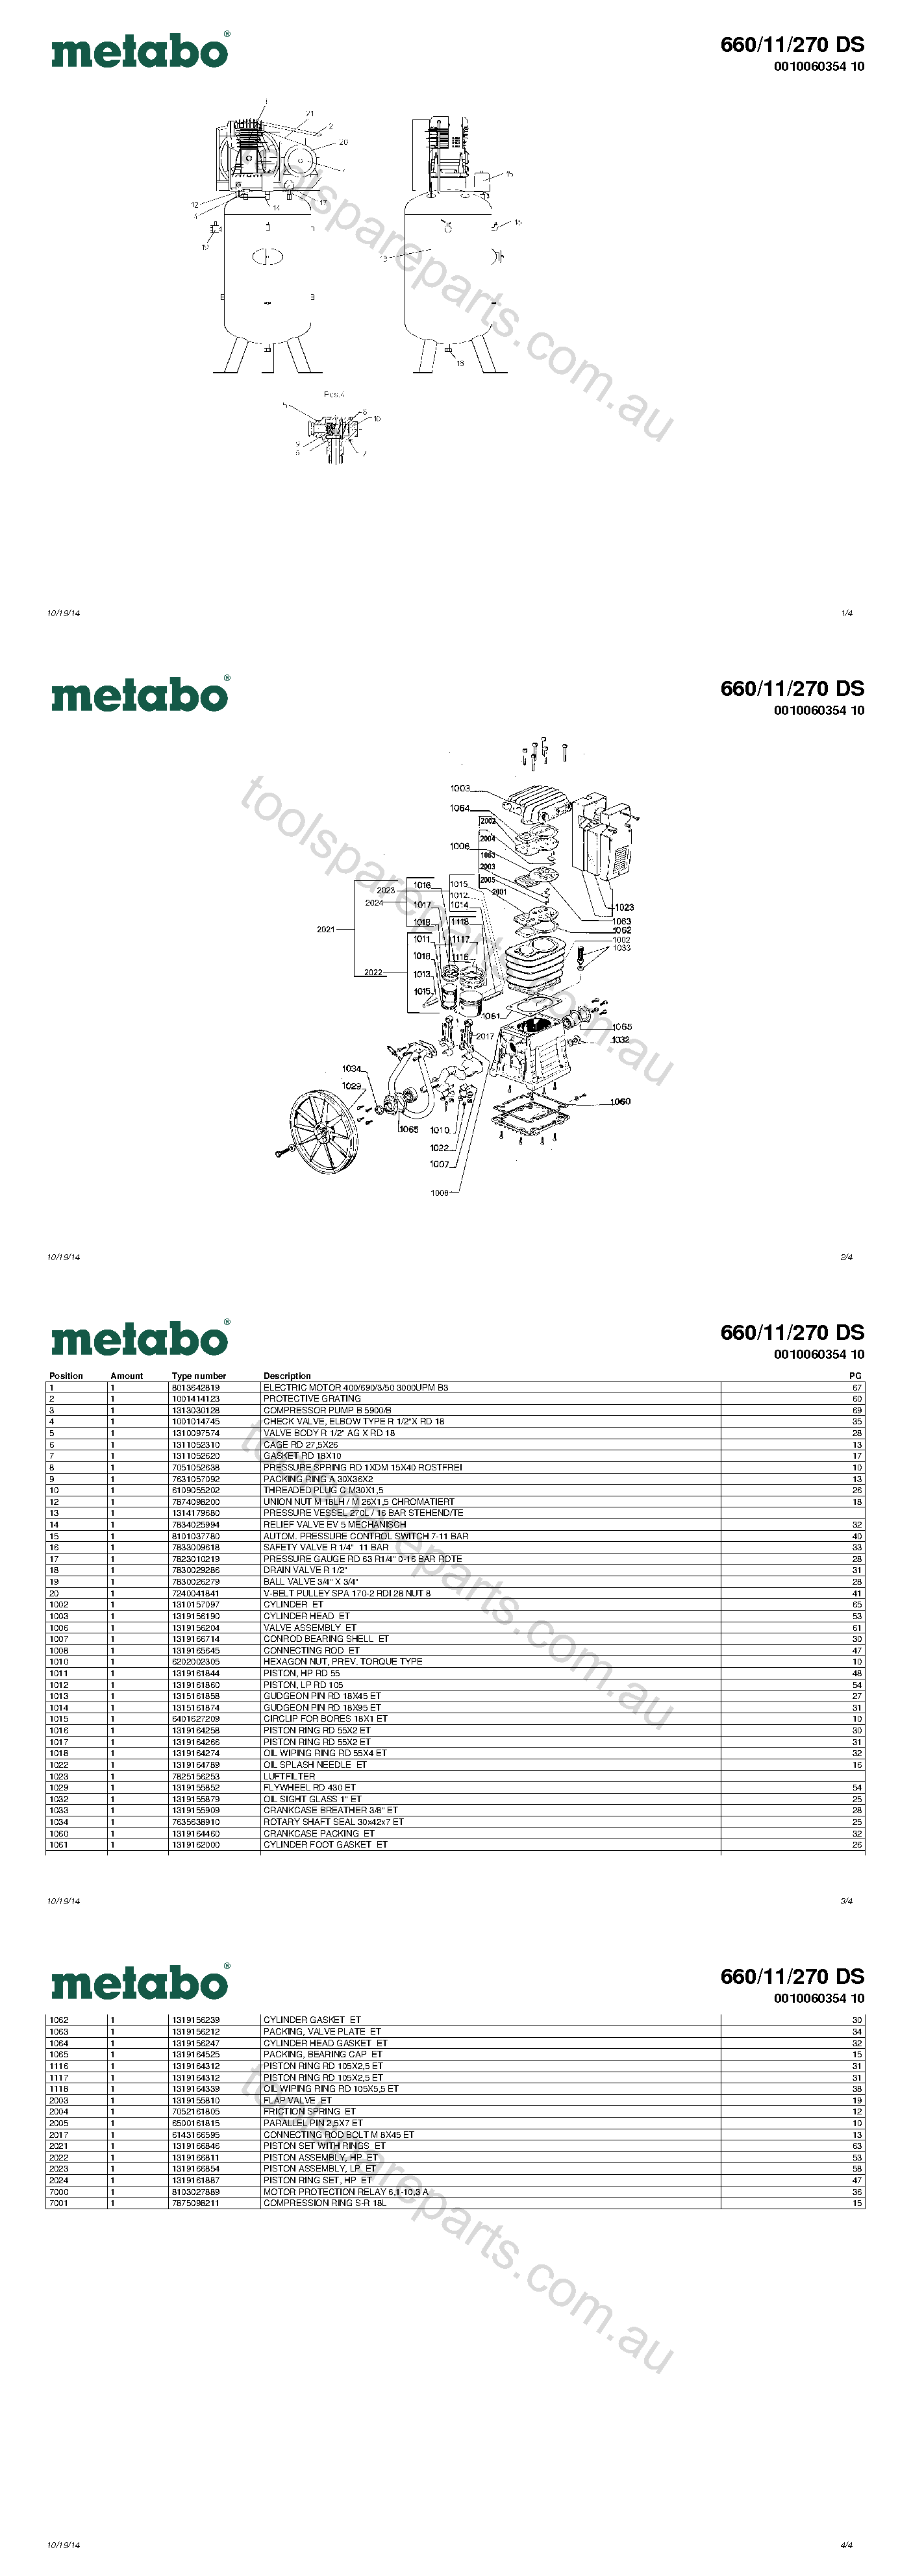 Metabo 660/11/270 DS 0010060354 10  Diagram 1